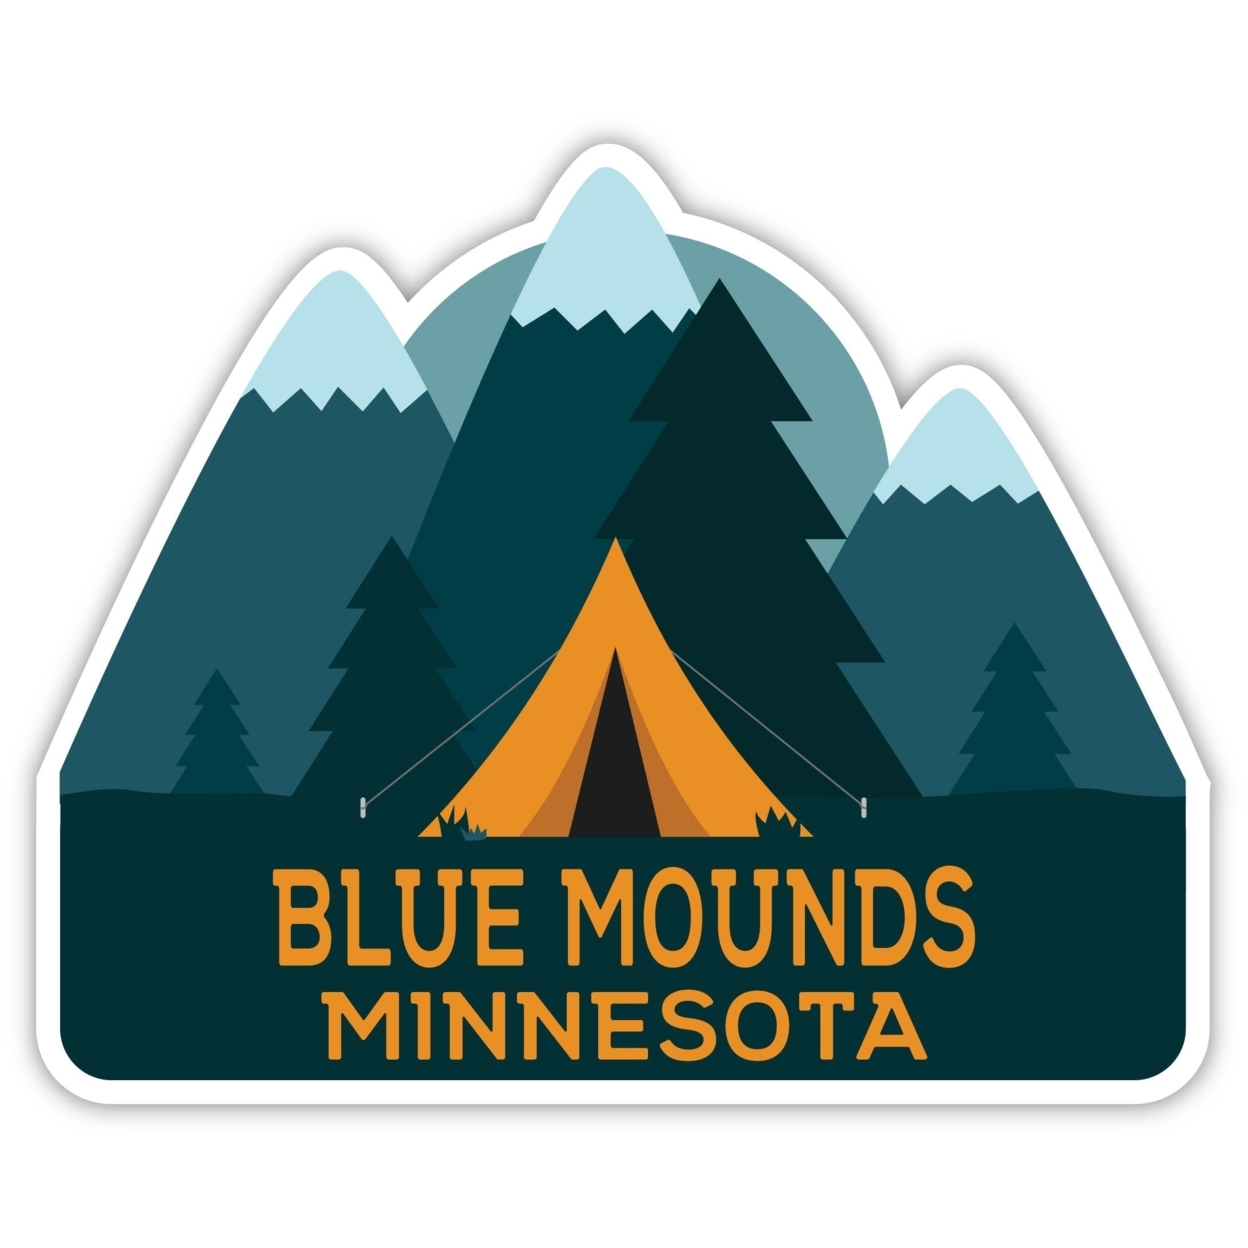 Blue Mounds Minnesota Souvenir Decorative Stickers (Choose Theme And Size) - 4-Pack, 6-Inch, Tent